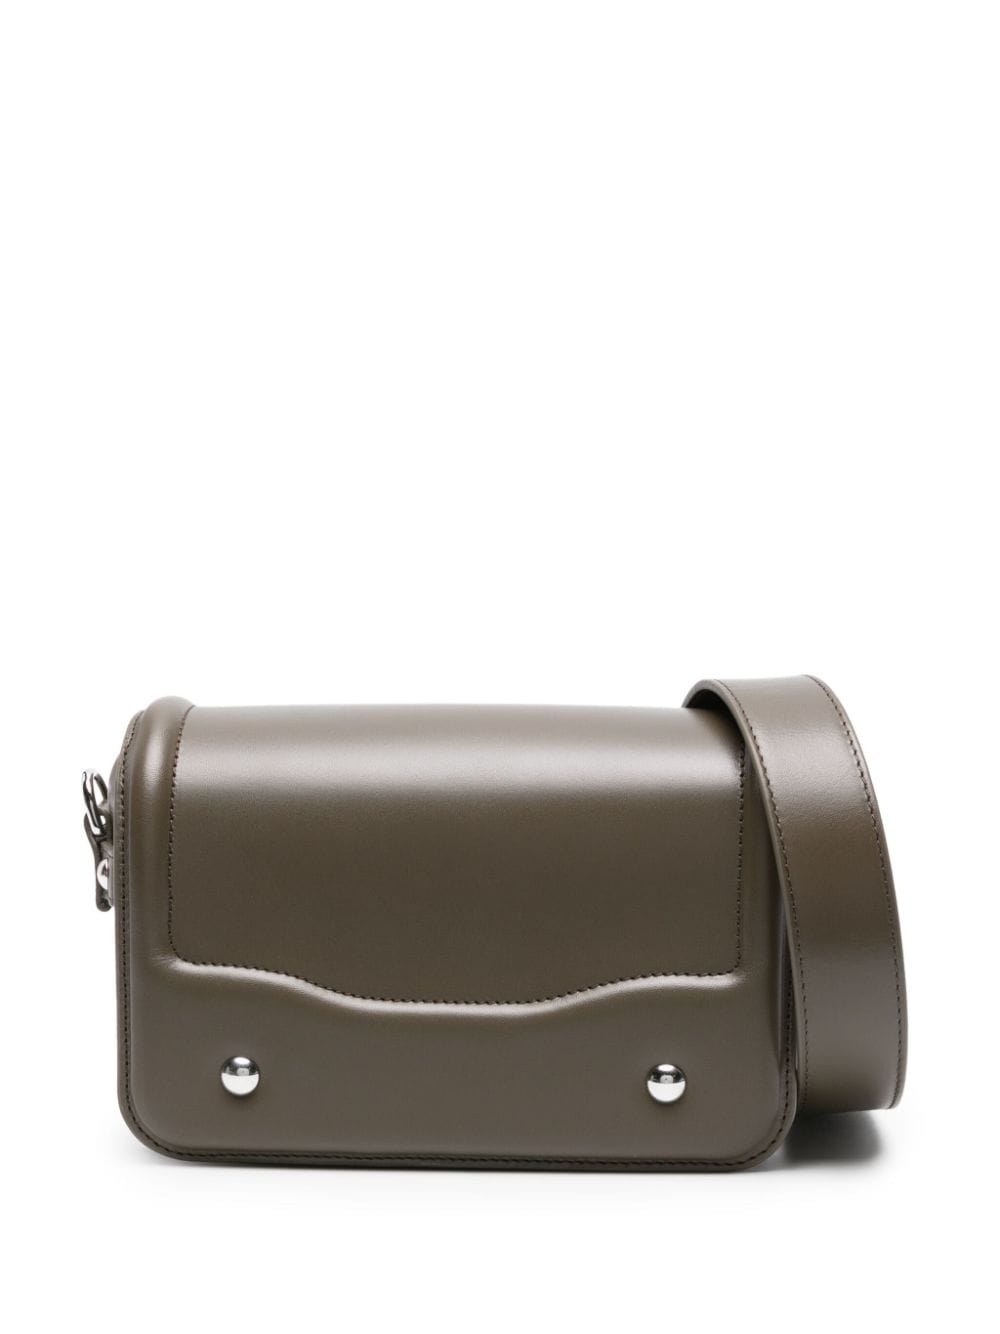 LEMAIRE mini Ransel leather crossbody bag - Brown von LEMAIRE